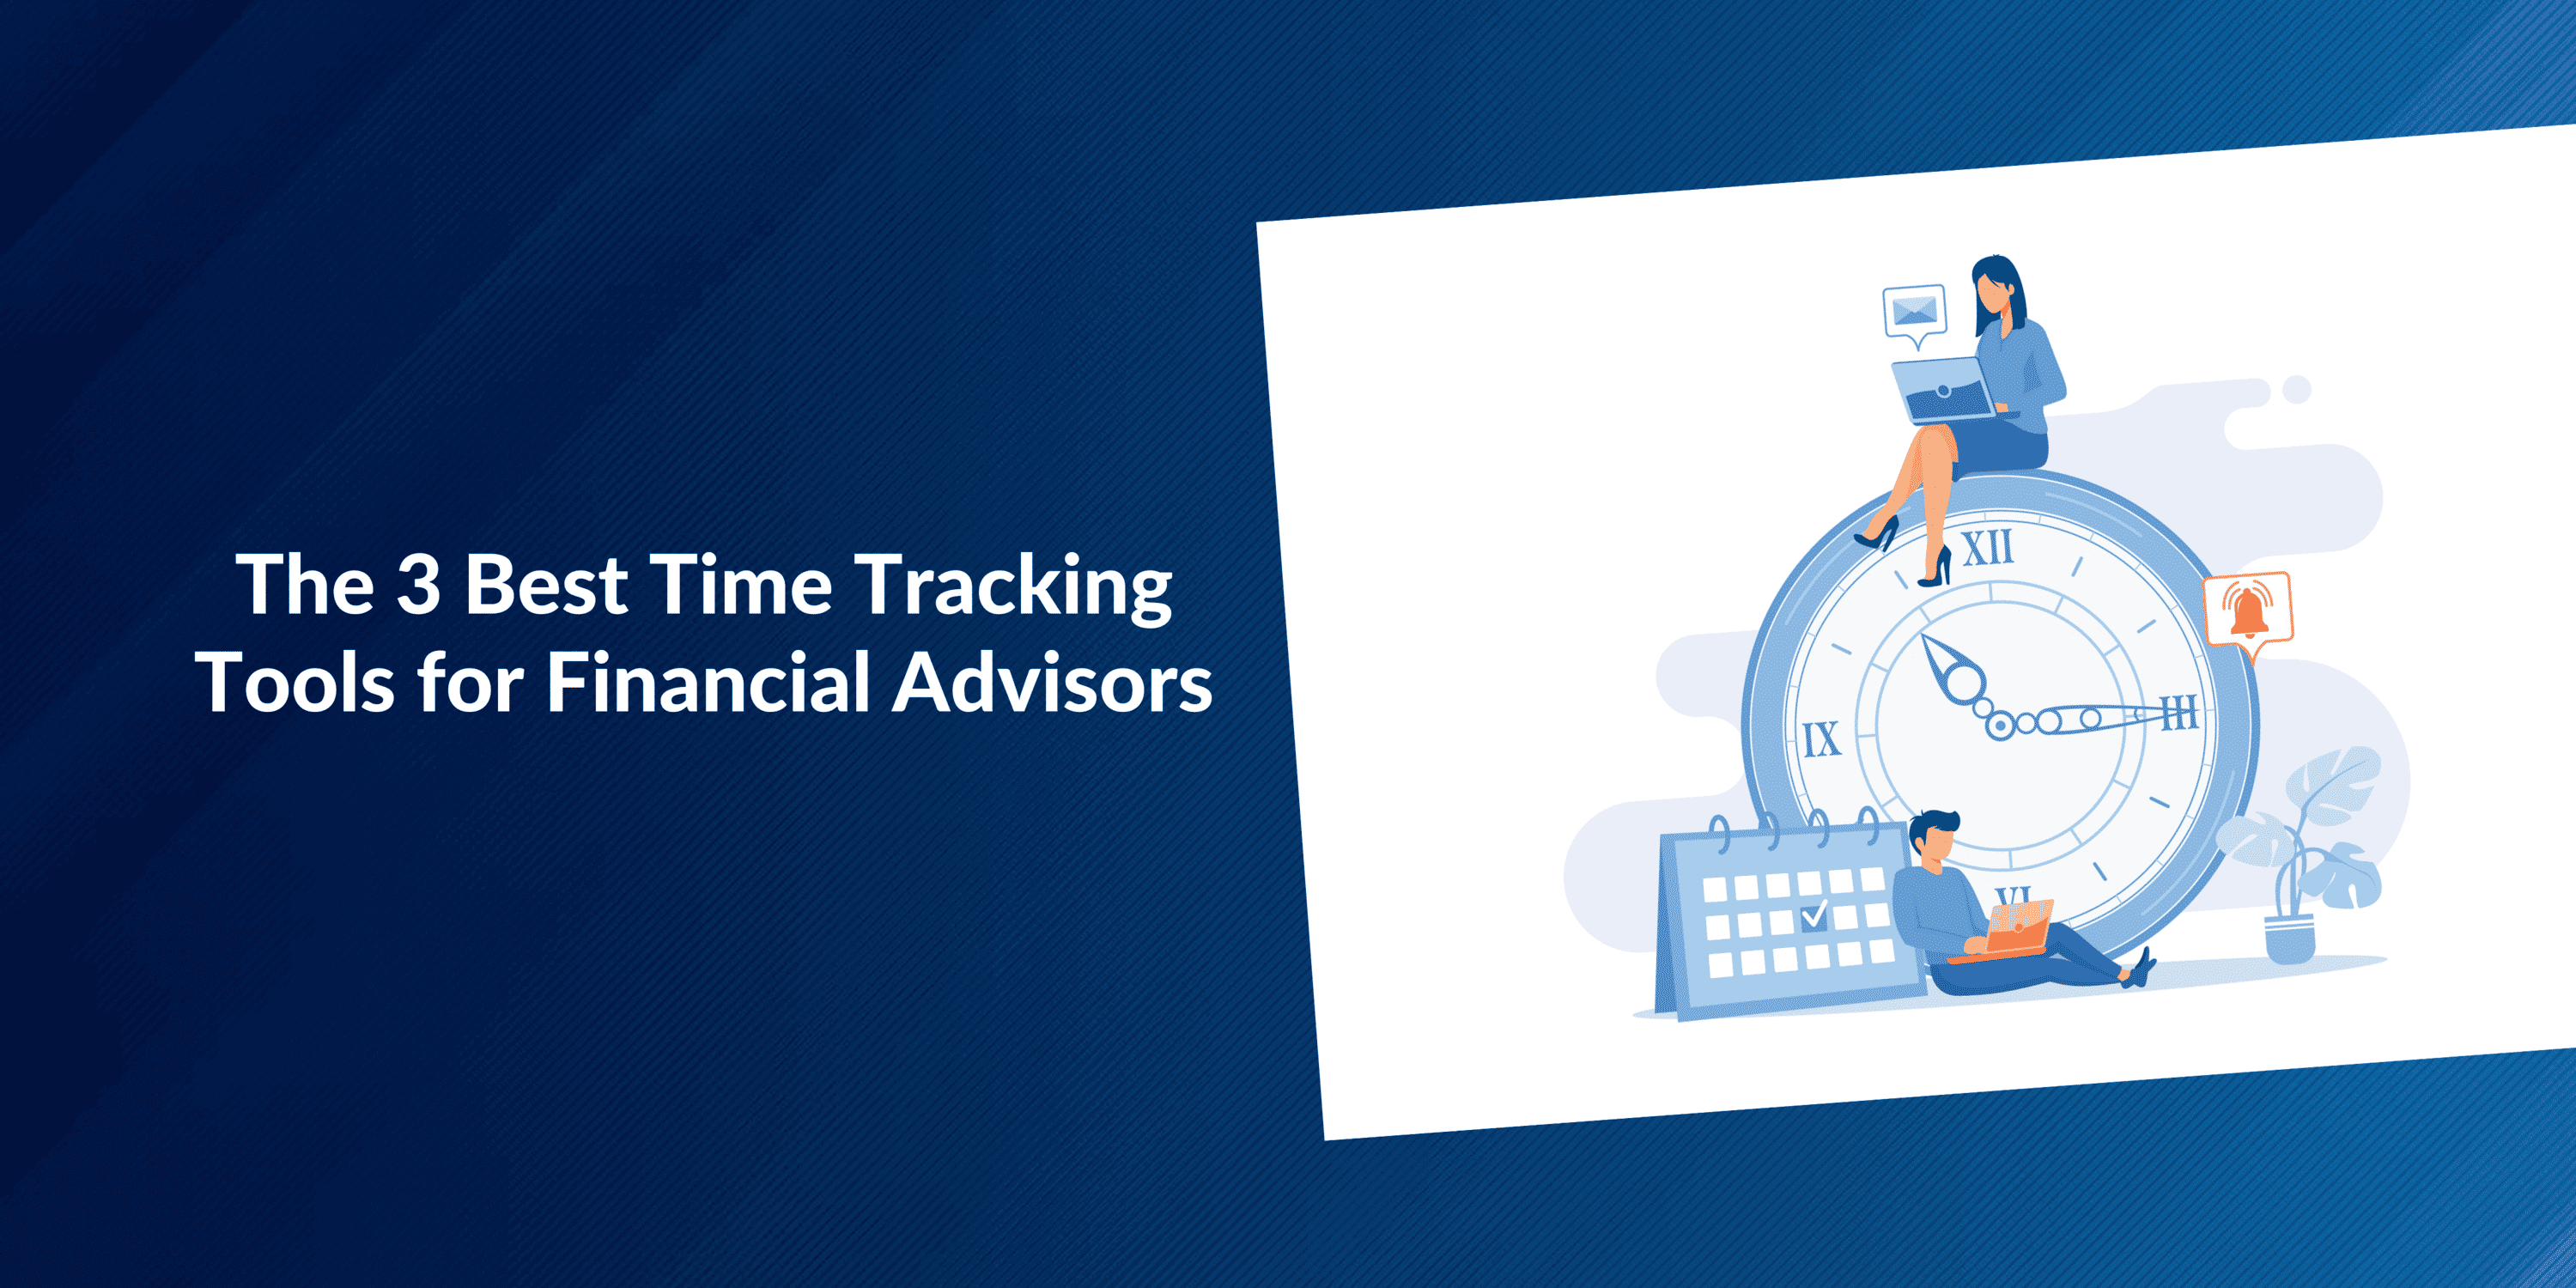 The 3 Best Time Tracking Tools for Financial Advisors